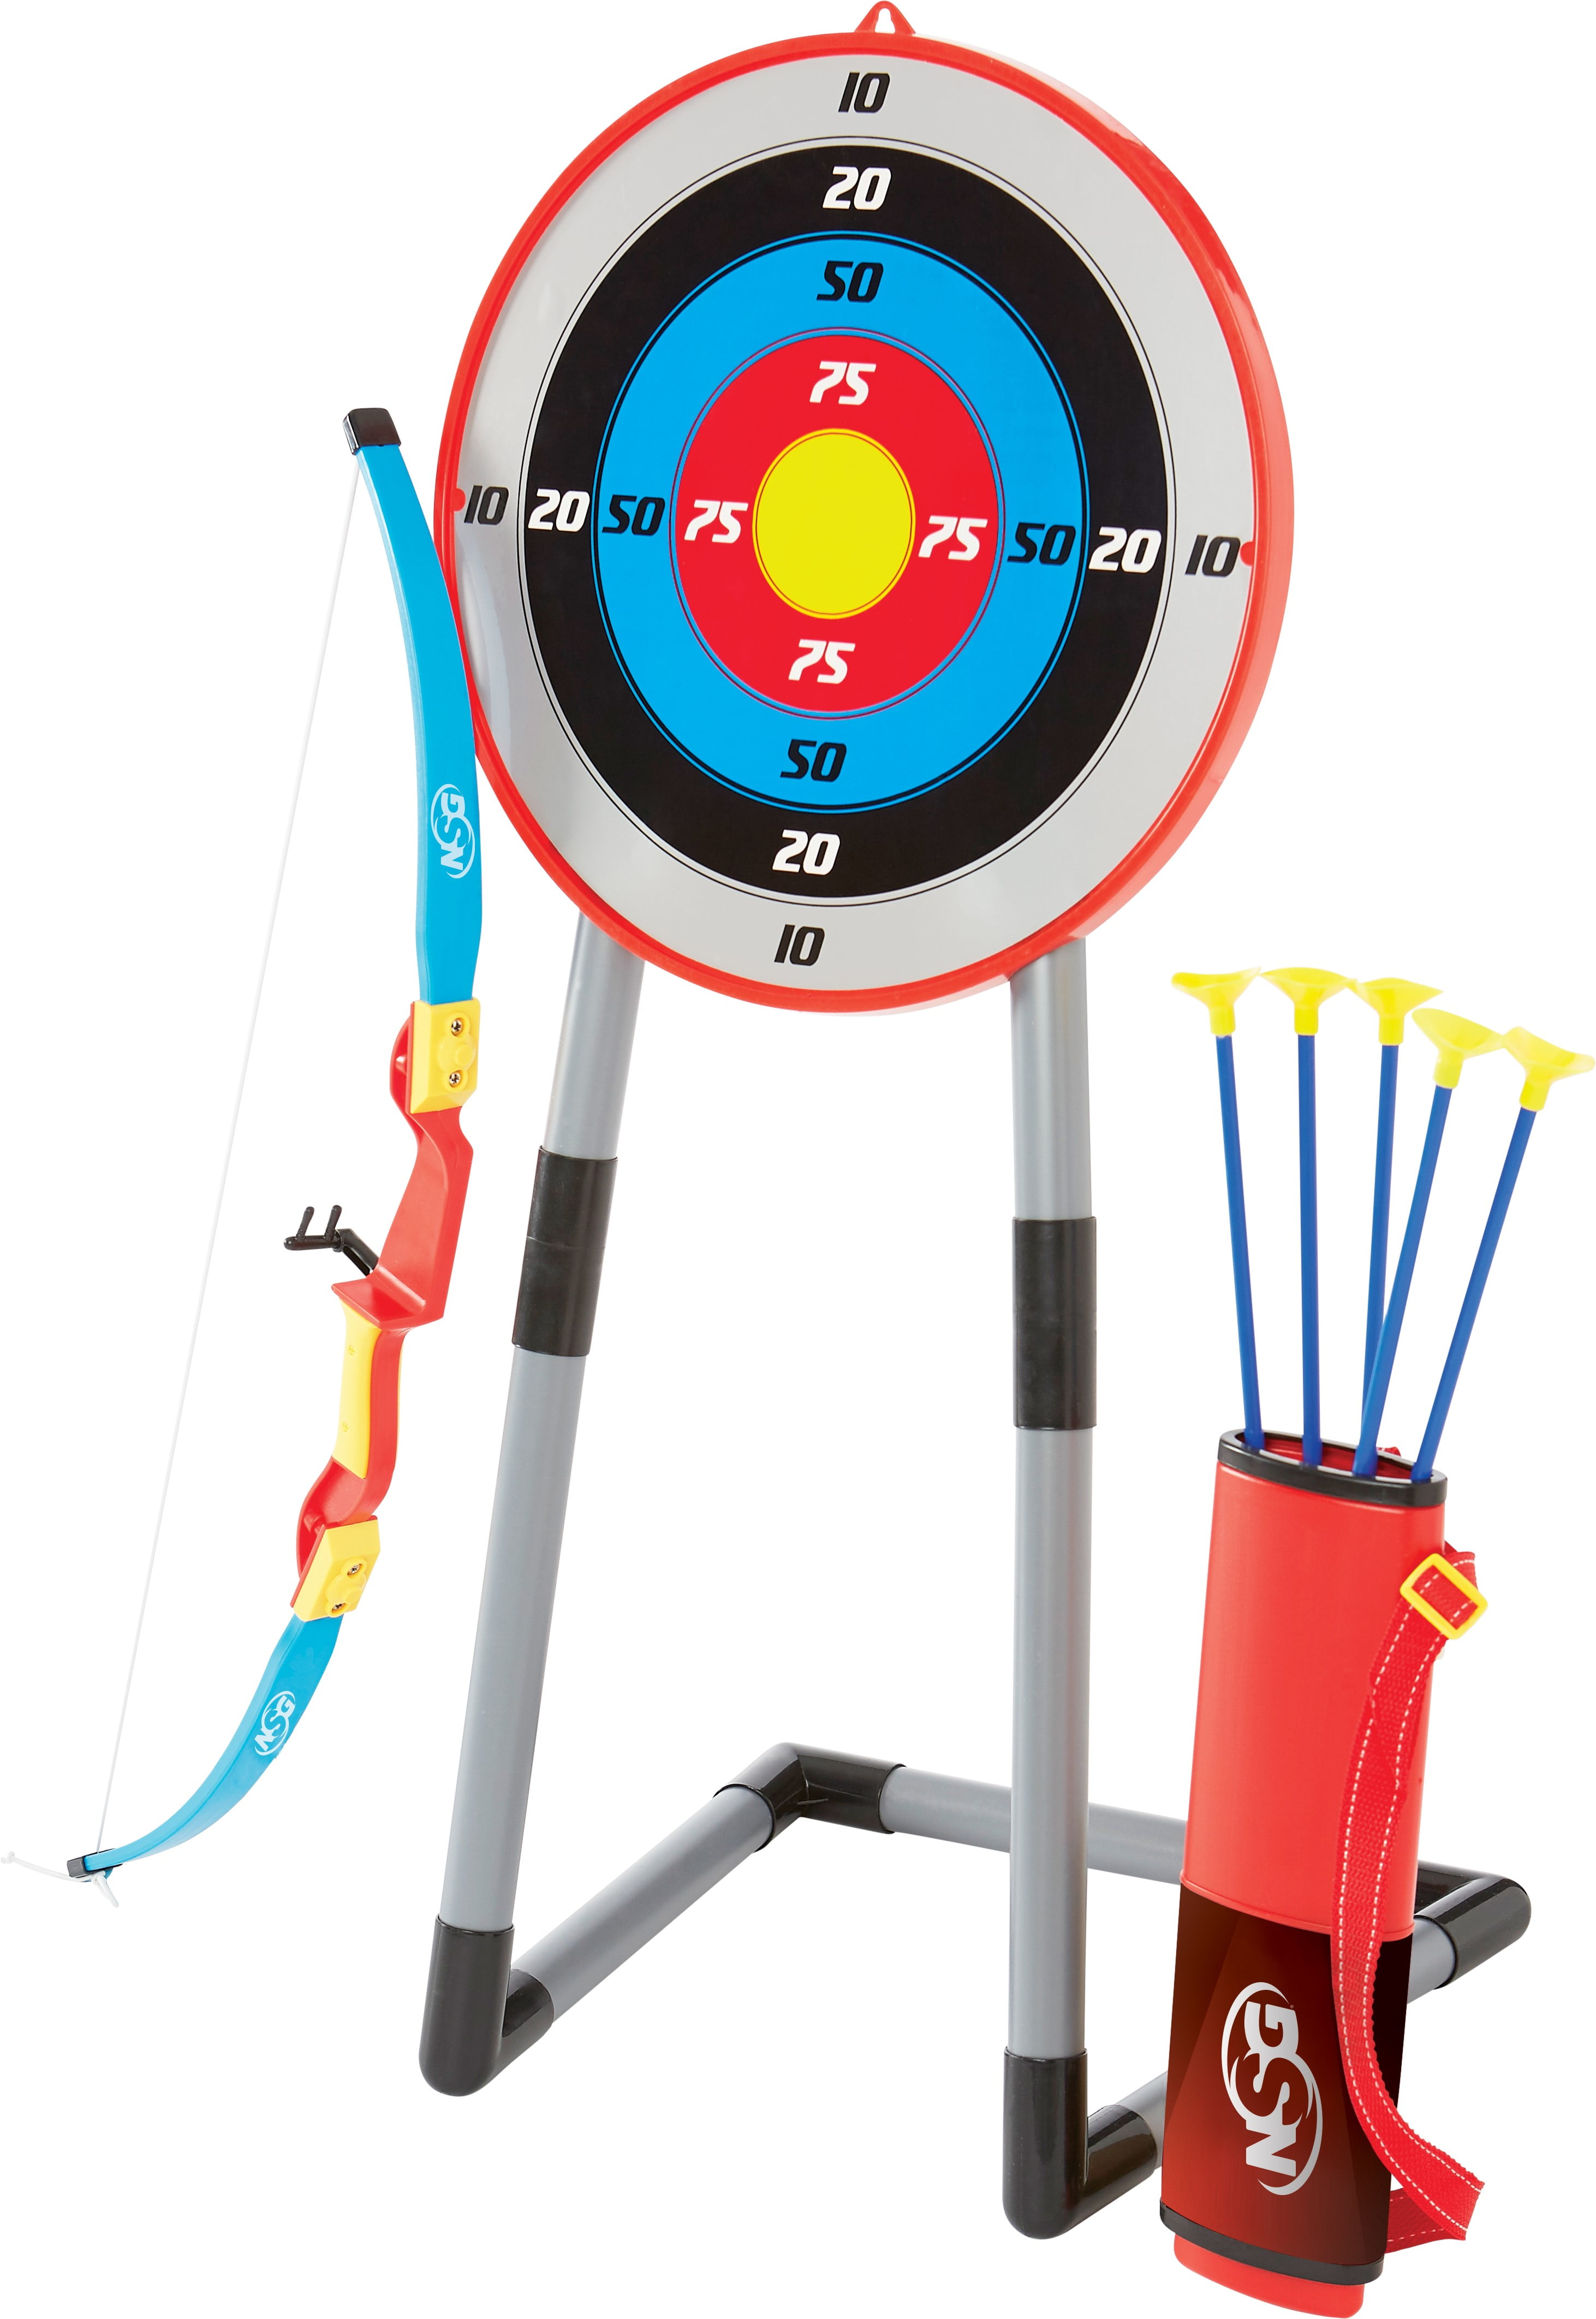 BRAND NEW Power Shot Toy Bow & Arrow Set Power Archer Shoots up to 50 Feet 